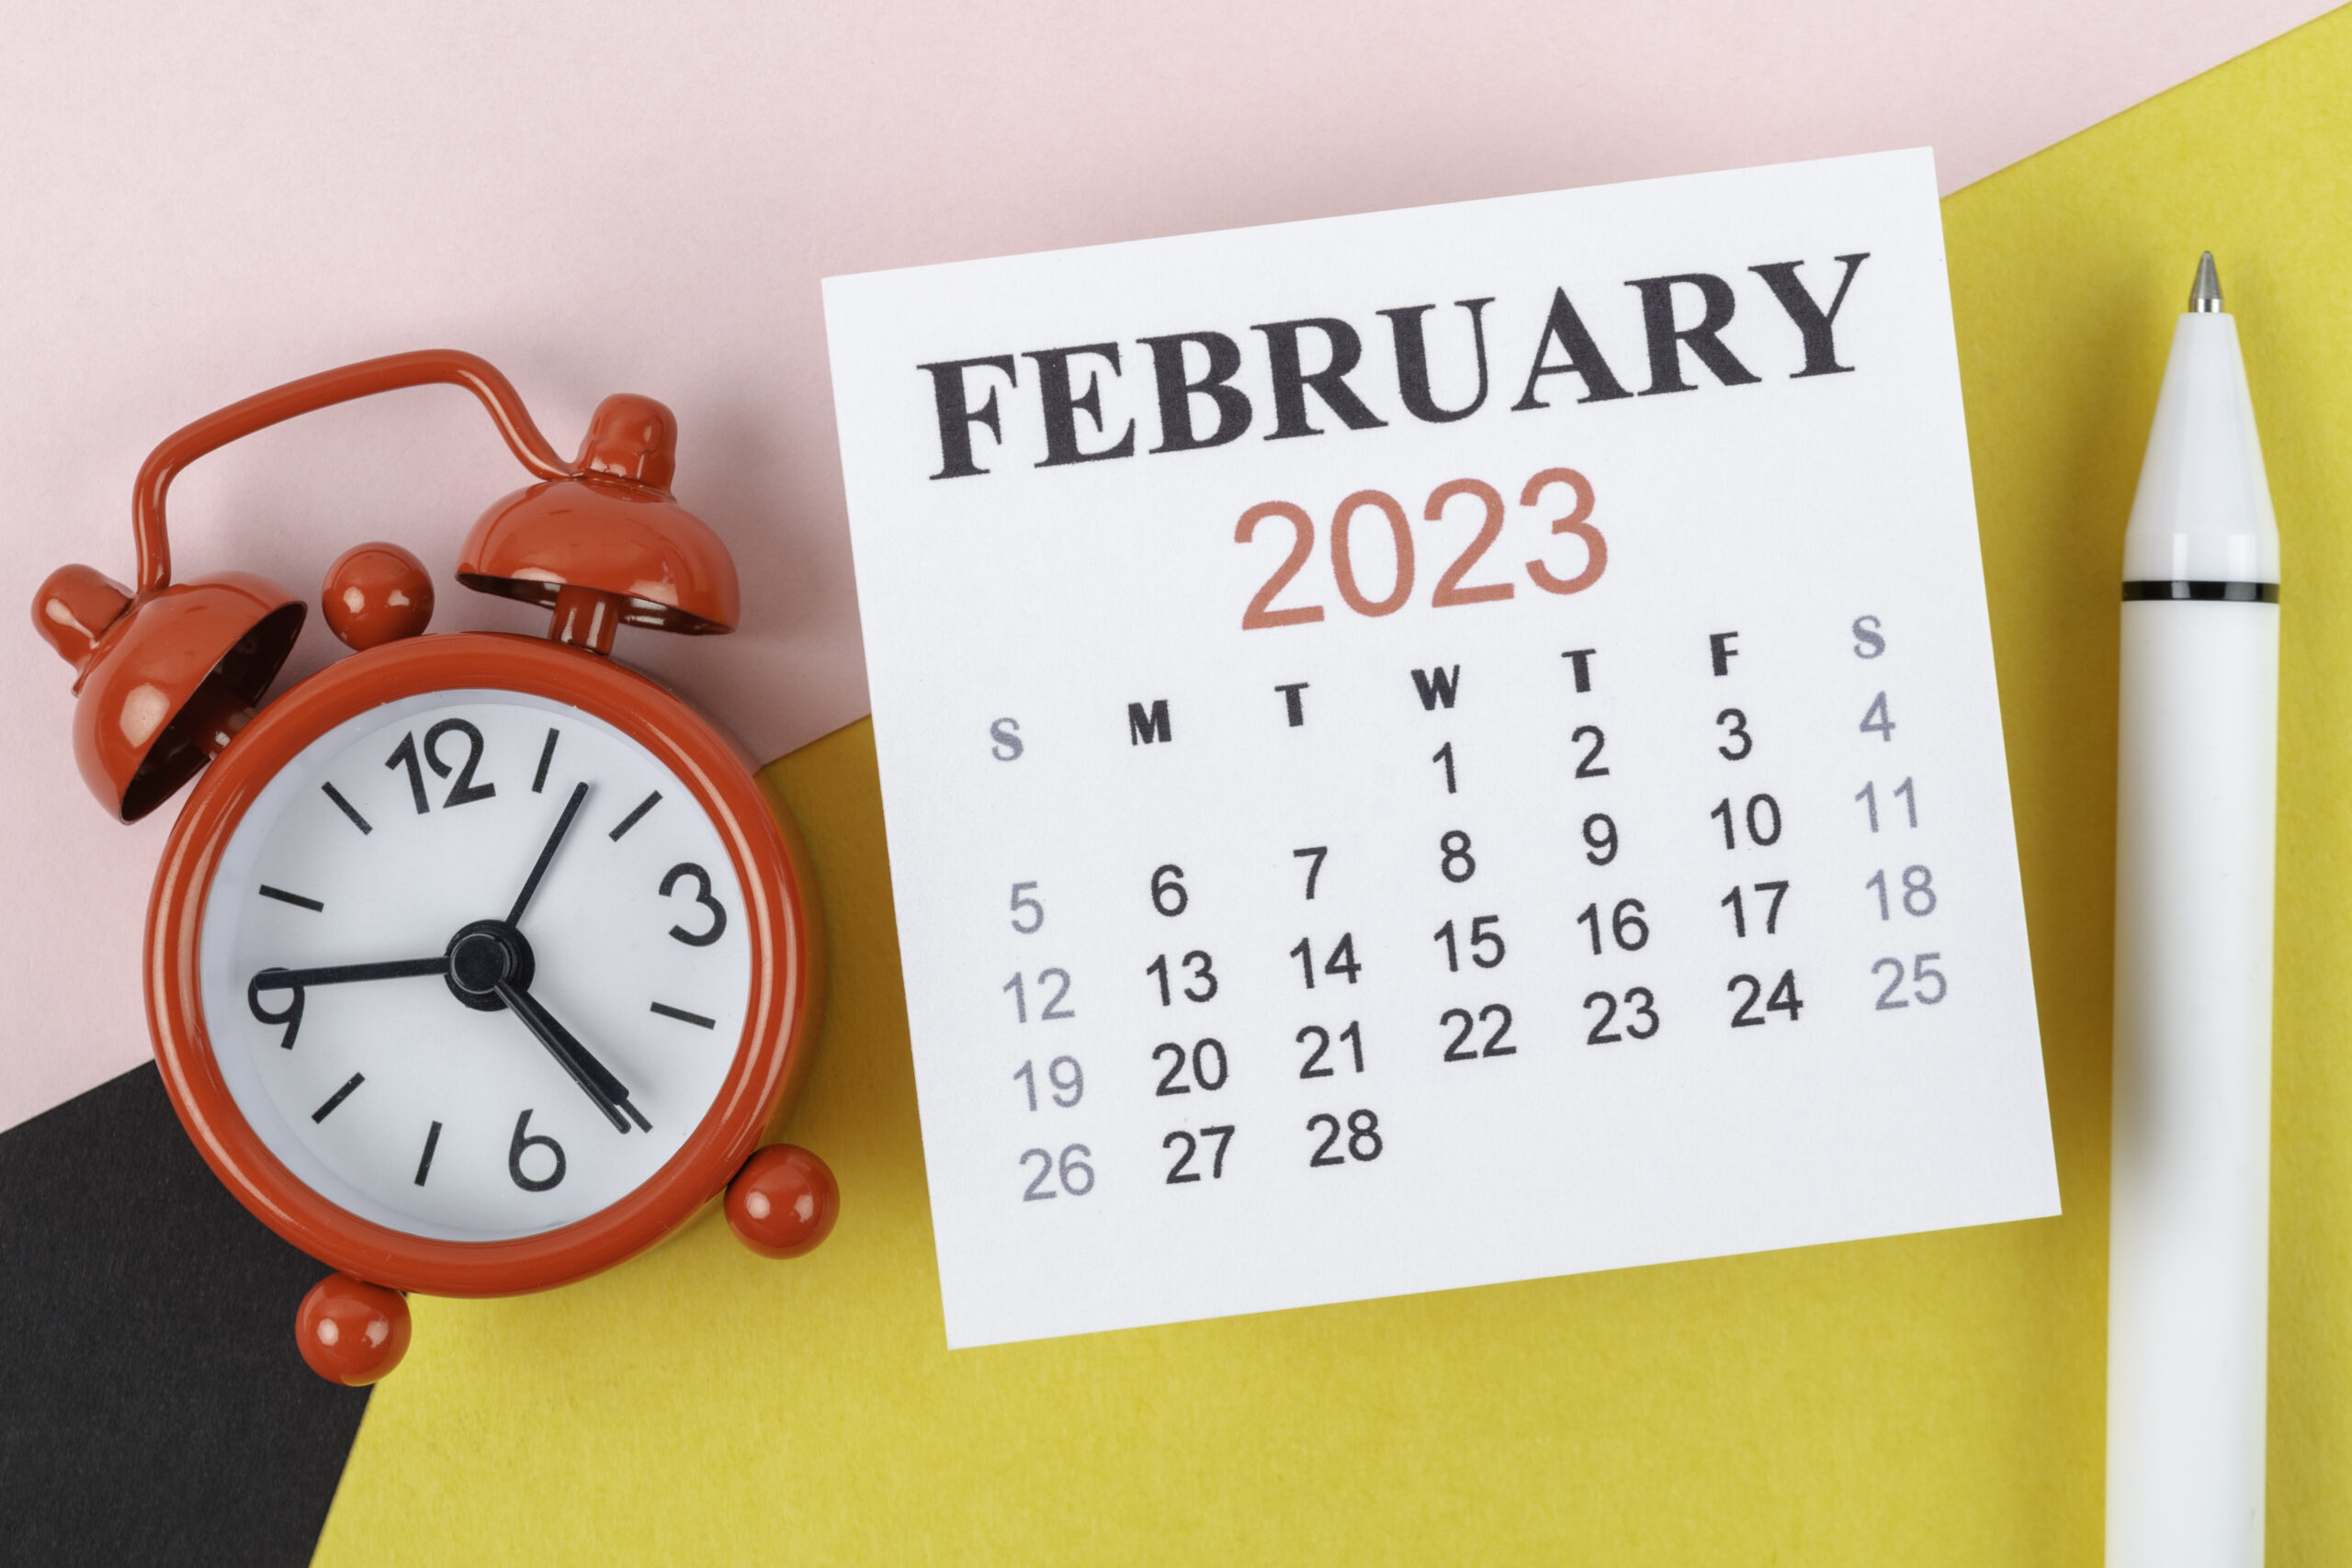 Calendar Desk 2023: February is the month for the organizer to plan and deadline with an alarm clock and white pen on a two-tone paper background.